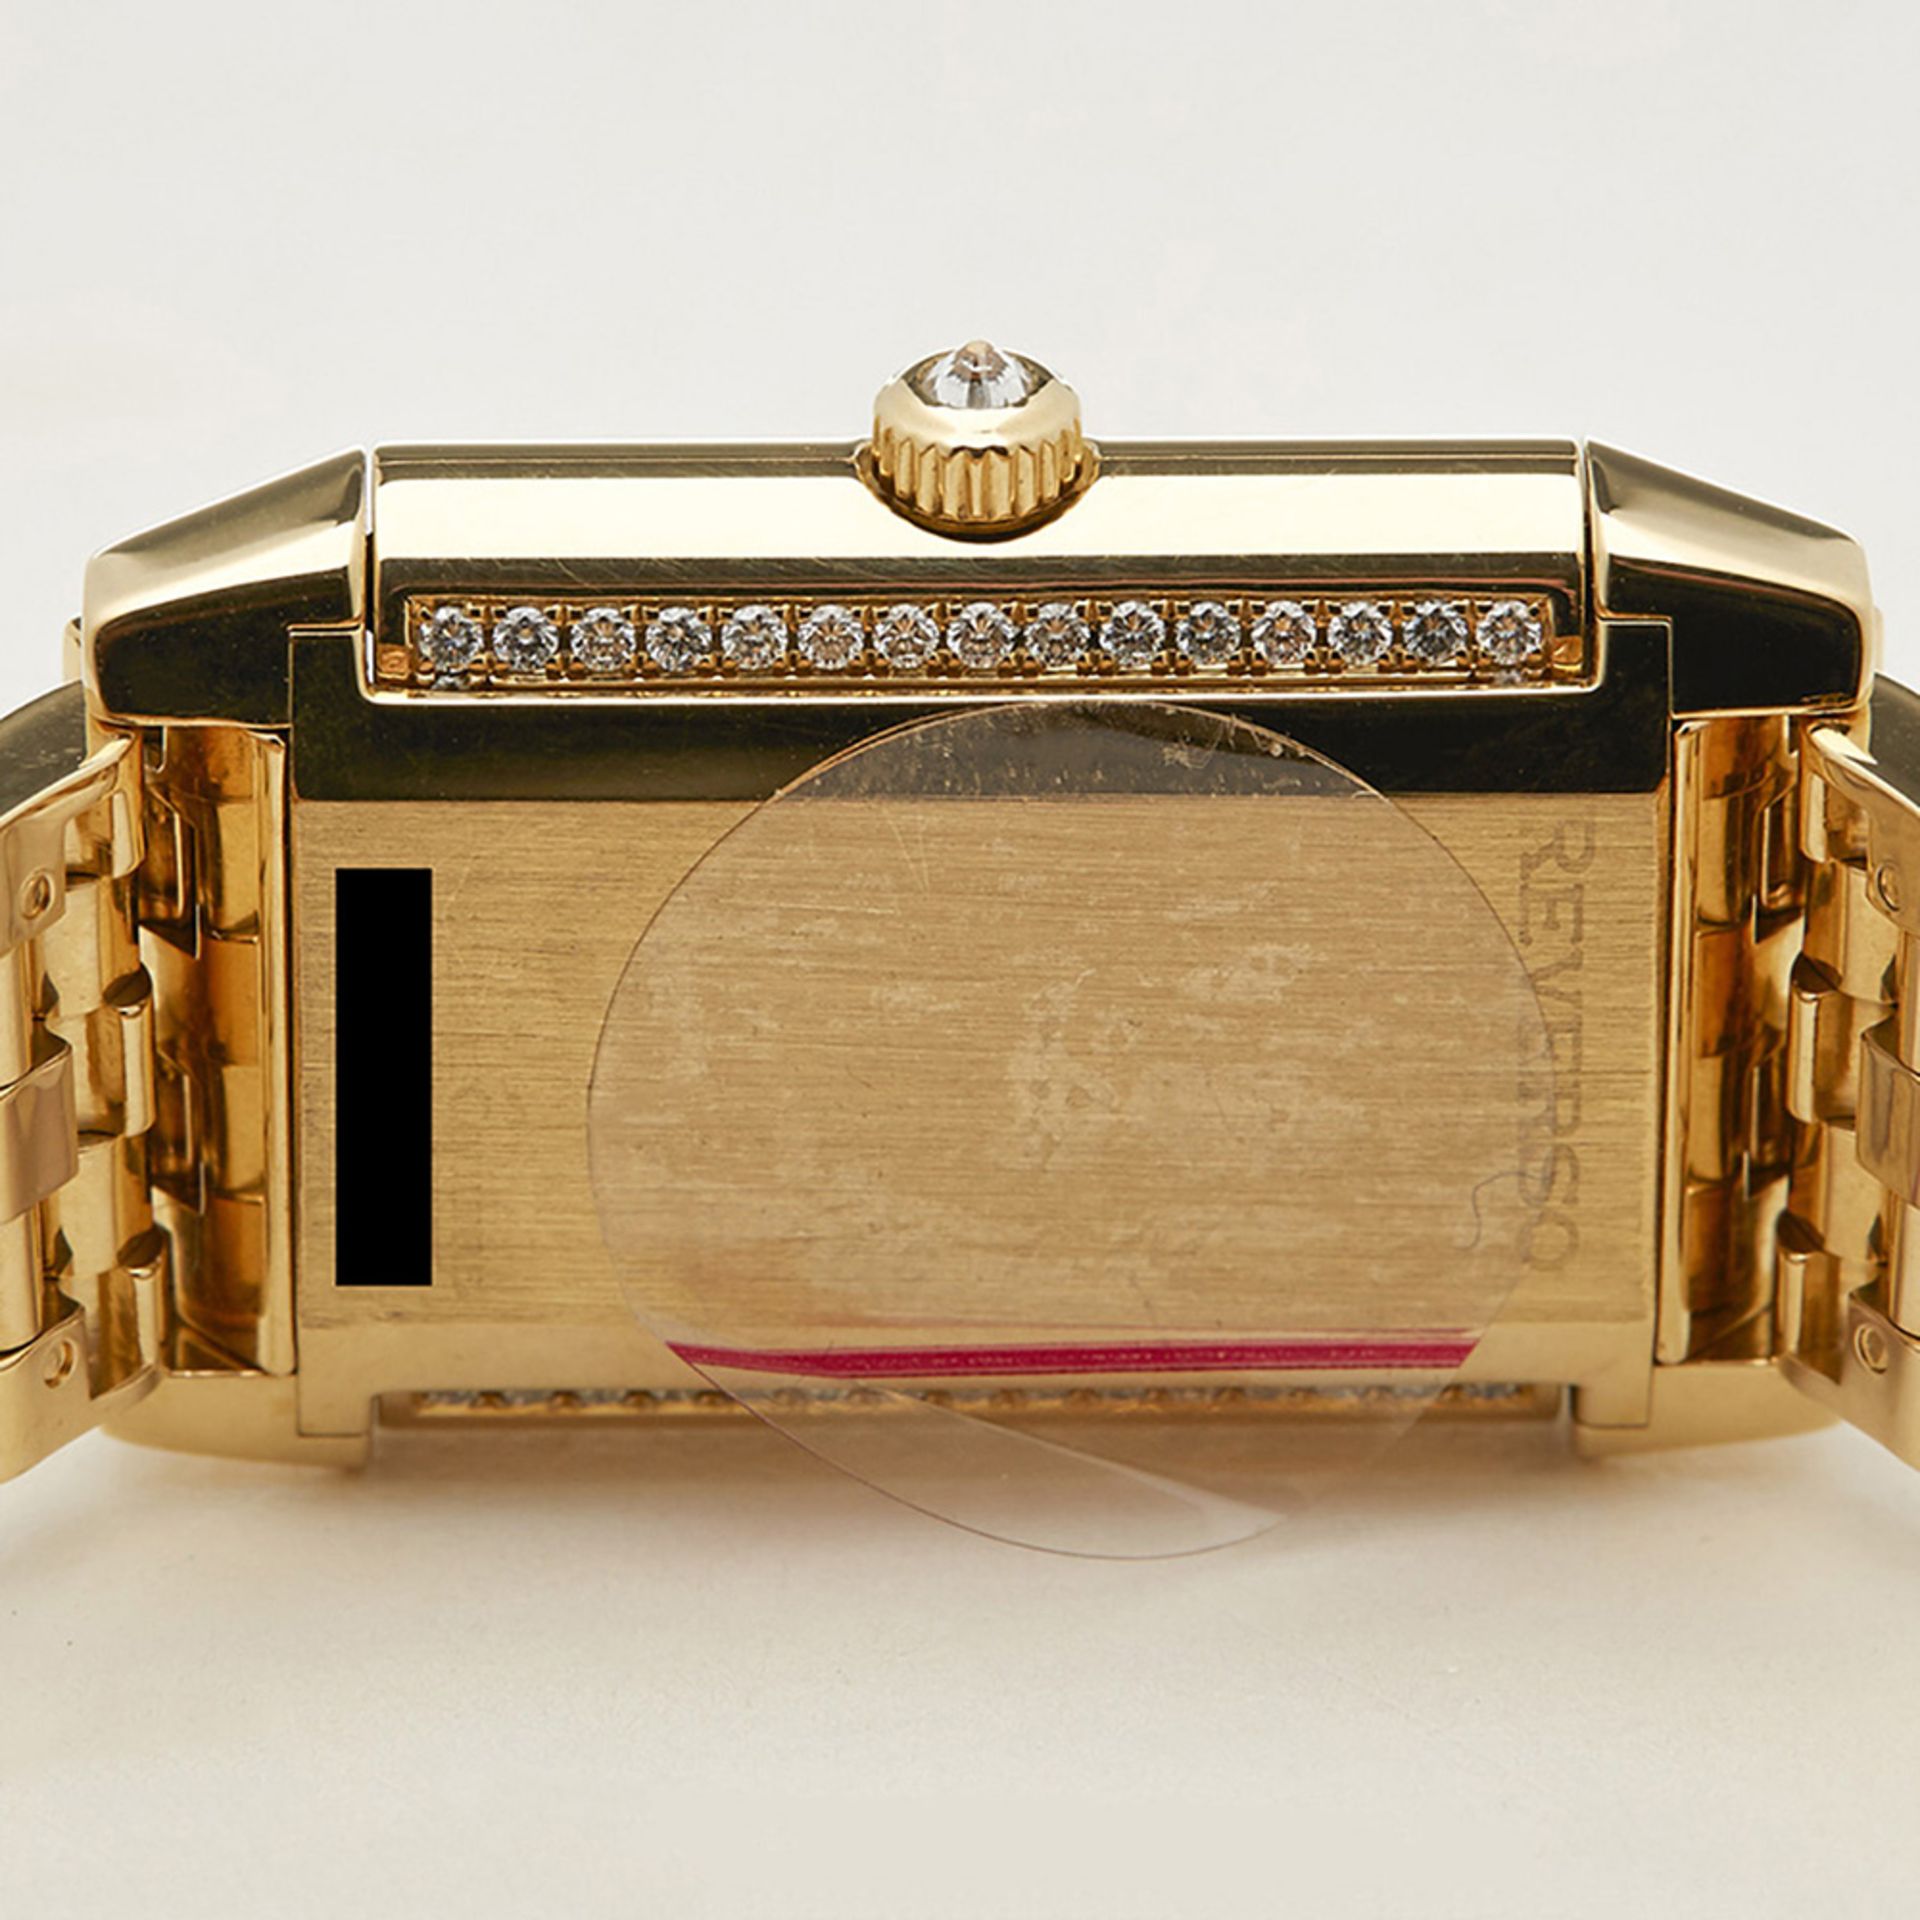 Jaeger-leCoultre Reverso Duetto Diamonds Special Edition 21mm 18k Yellow Gold - 266.1.44 - Image 9 of 10